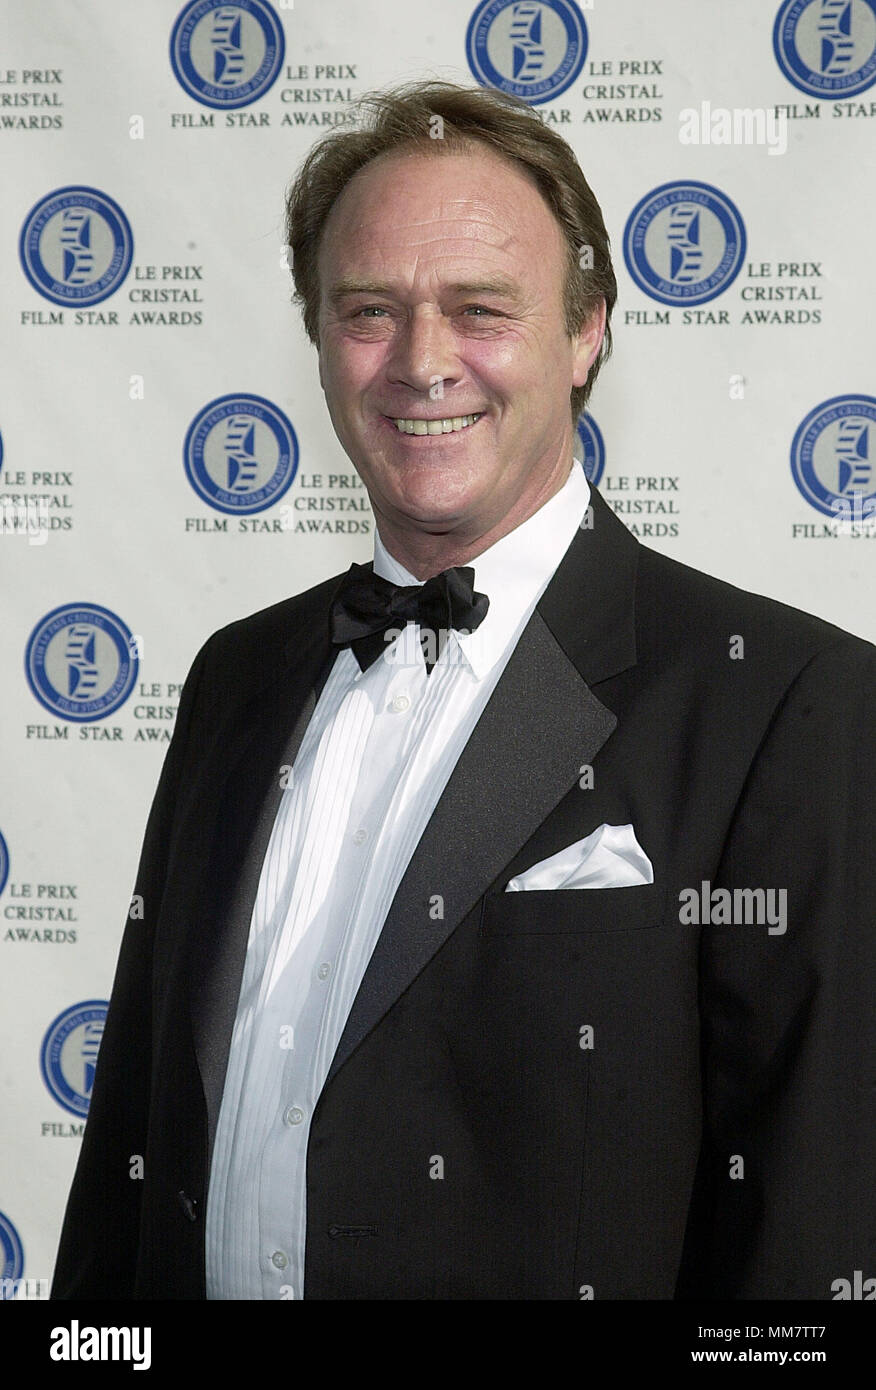 Christopher Cazenove arriving at  The 5th Annual ' Le Prix  Cristal Awards ' in Los Angeles  4/29/2001CazenoveChristopher01.jpgCazenoveChristopher01 Red Carpet Event, Vertical, USA, Film Industry, Celebrities,  Photography, Bestof, Arts Culture and Entertainment, Topix Celebrities fashion /  Vertical, Best of, Event in Hollywood Life - California,  Red Carpet and backstage, USA, Film Industry, Celebrities,  movie celebrities, TV celebrities, Music celebrities, Photography, Bestof, Arts Culture and Entertainment,  Topix, headshot, vertical, one person,, from the year , 2001, inquiry tsuni@Gamma Stock Photo